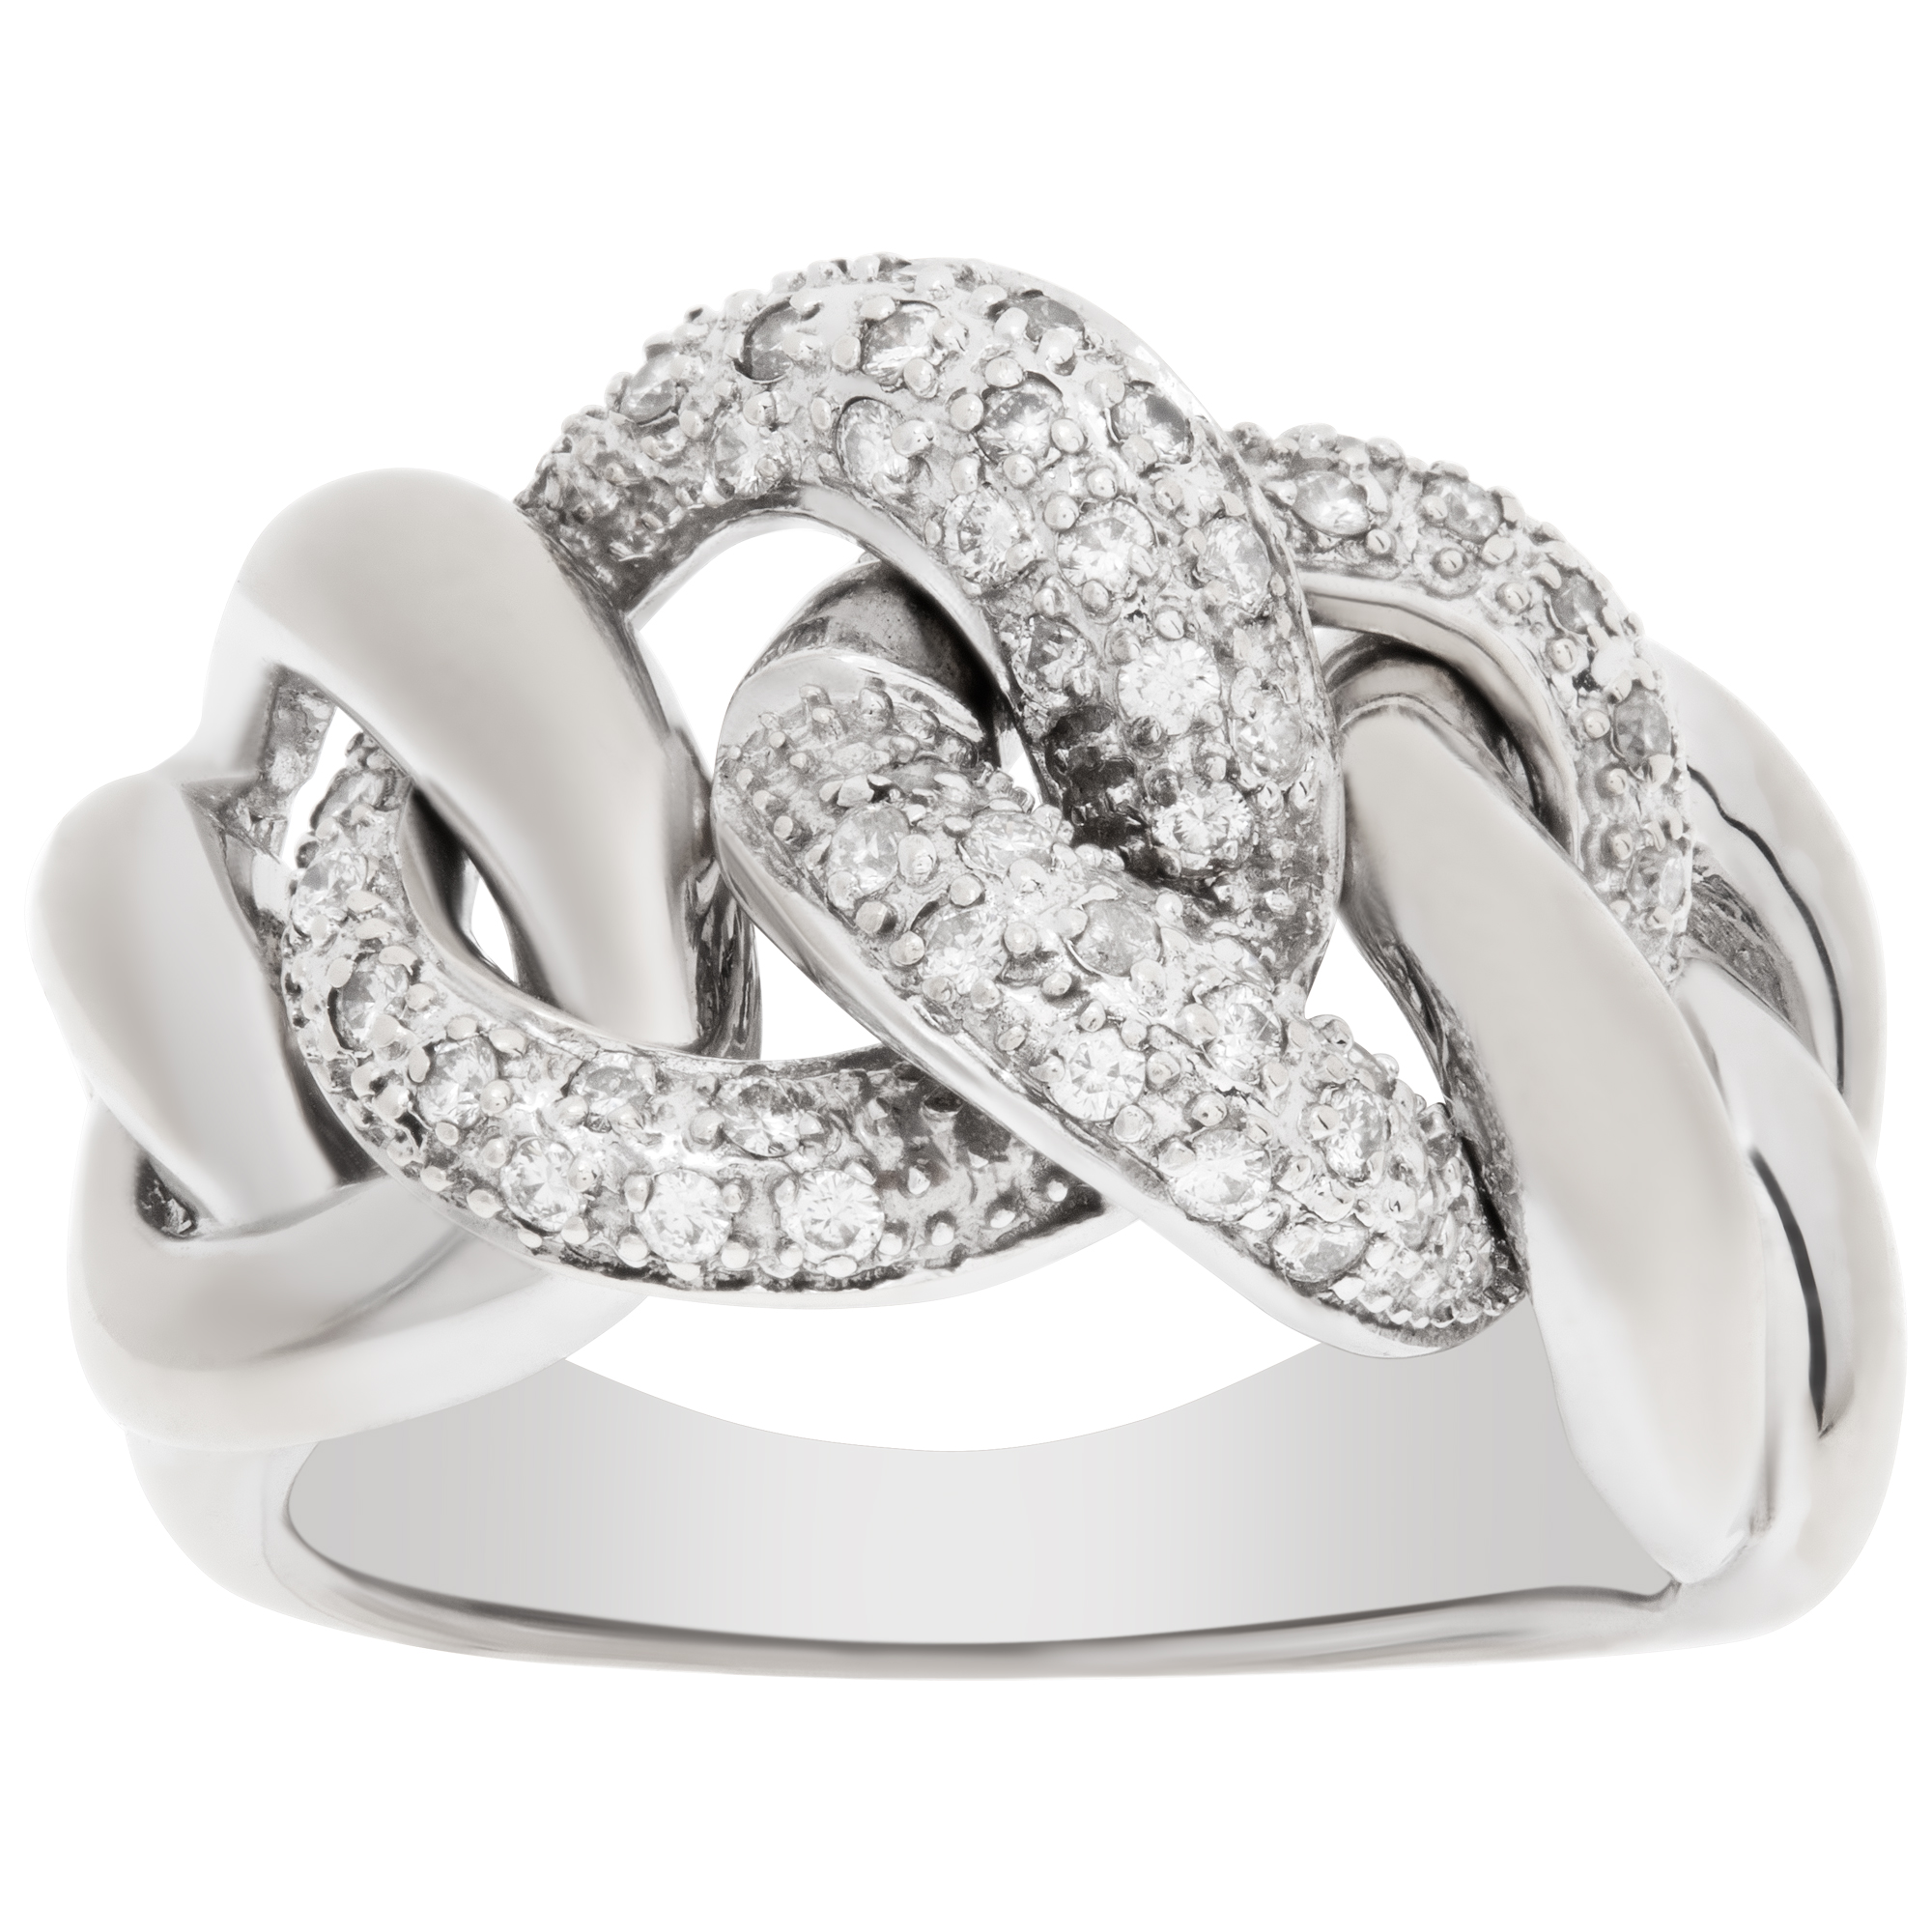 Pave Diamond link ring in 14k white gold. 0.50 carats in diamonds. Size 8